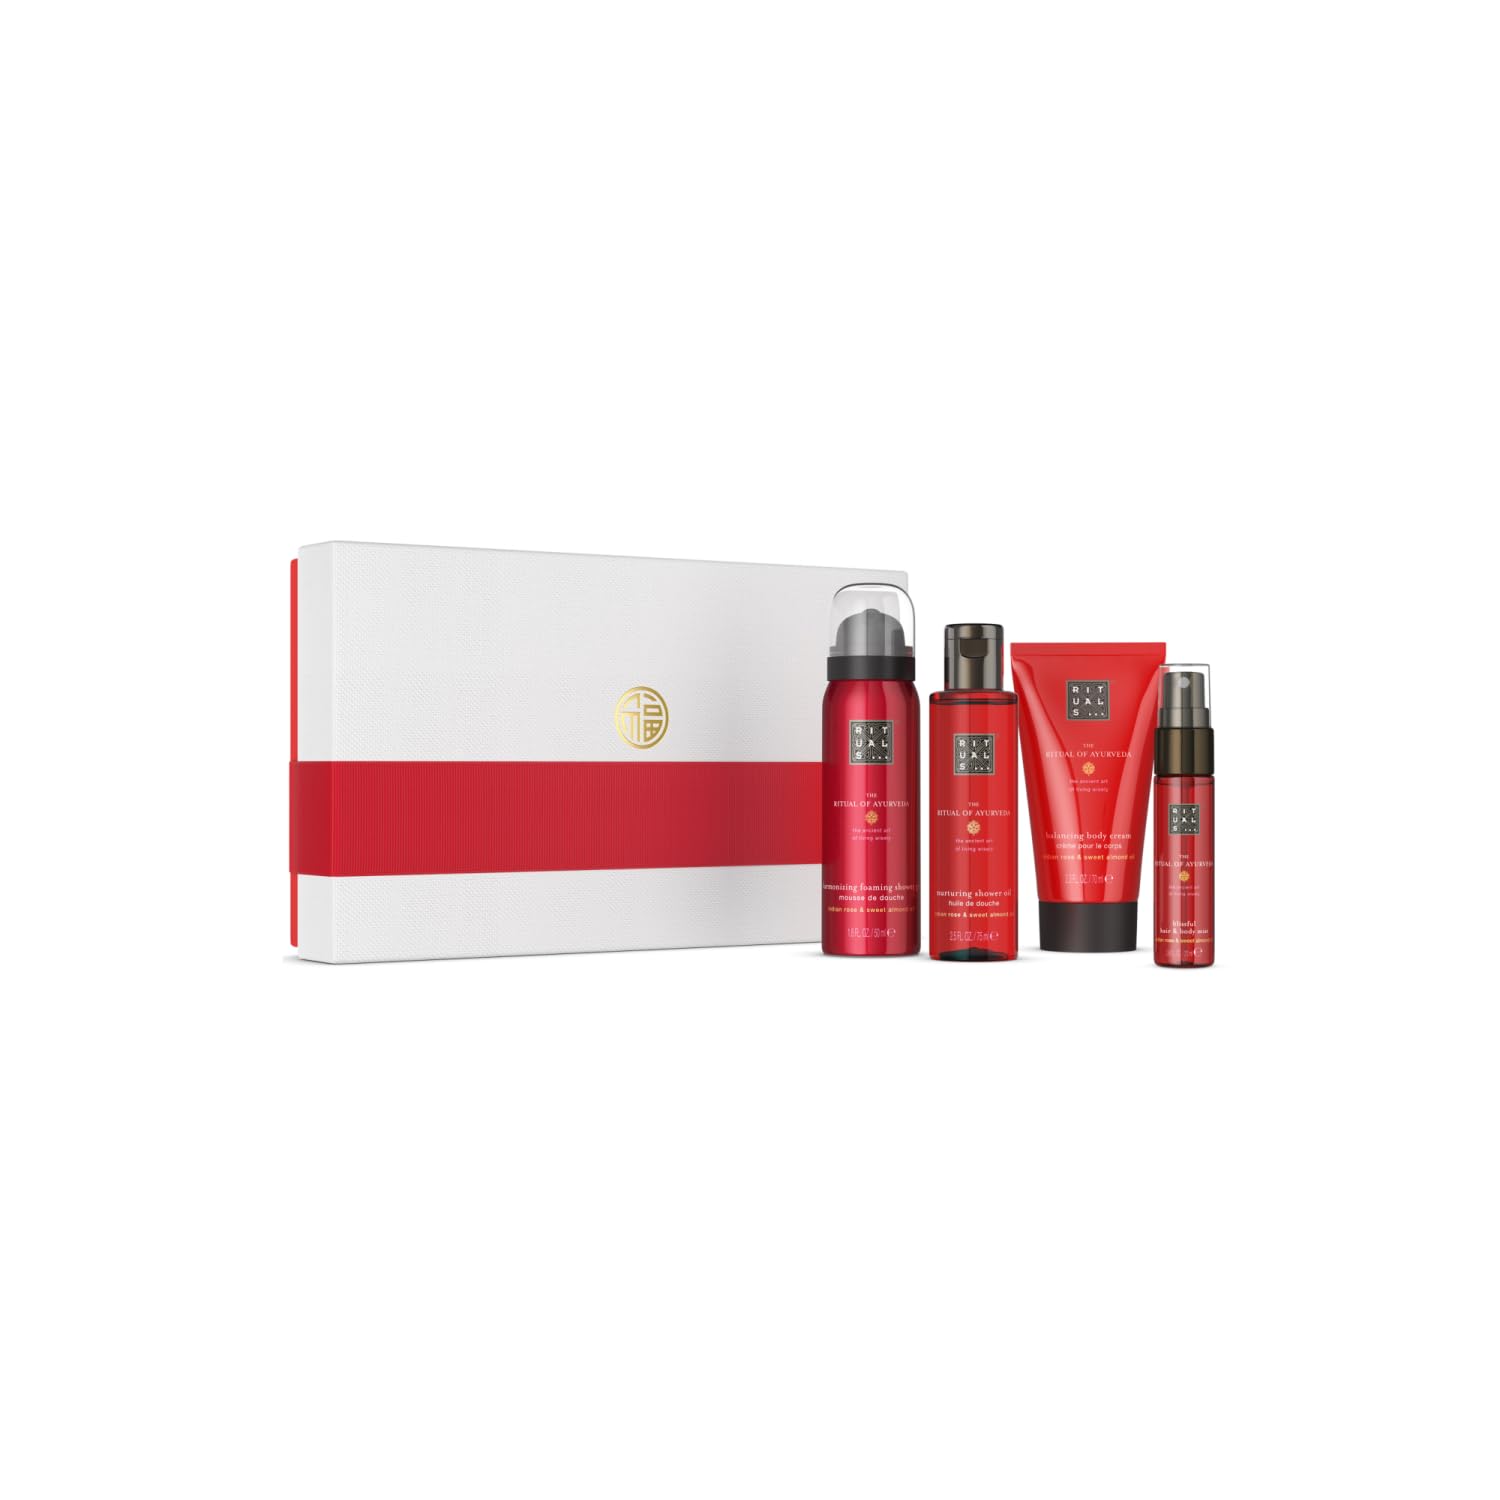 RITUALS The Ritual of Ayurveda Gift Set S - Gift Box with 4 Personal Care Products with Indian Rose and Sweet Almond Oil - Balancing Fragrance